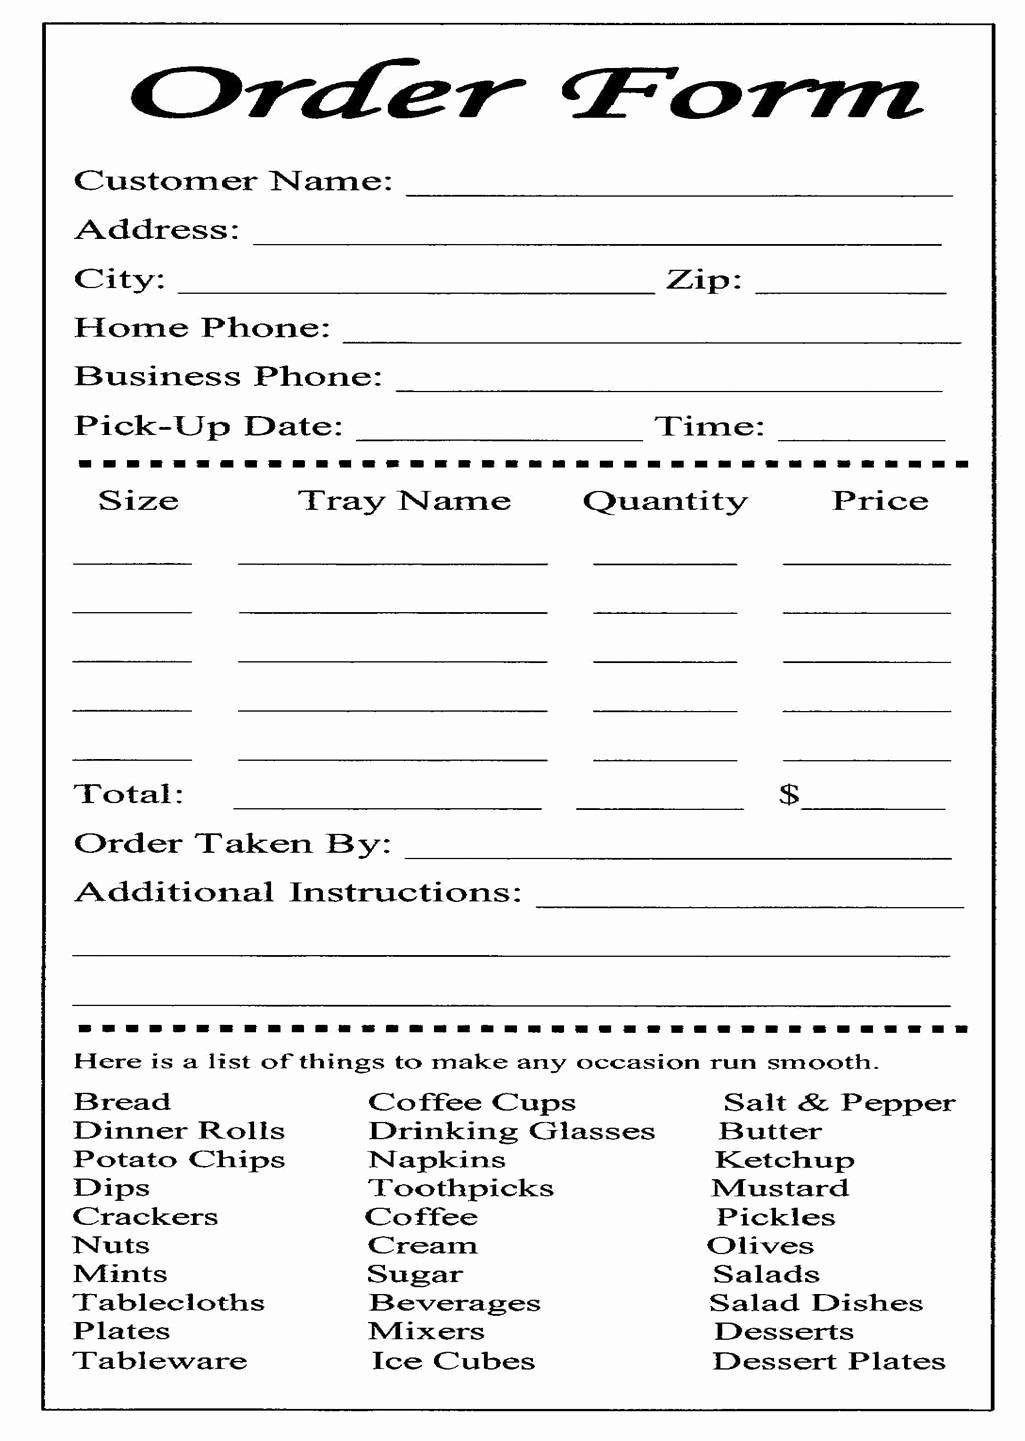 Bakery Order Form Template Free Unique Cake Order Form Template - Free Printable Bakery Order Forms